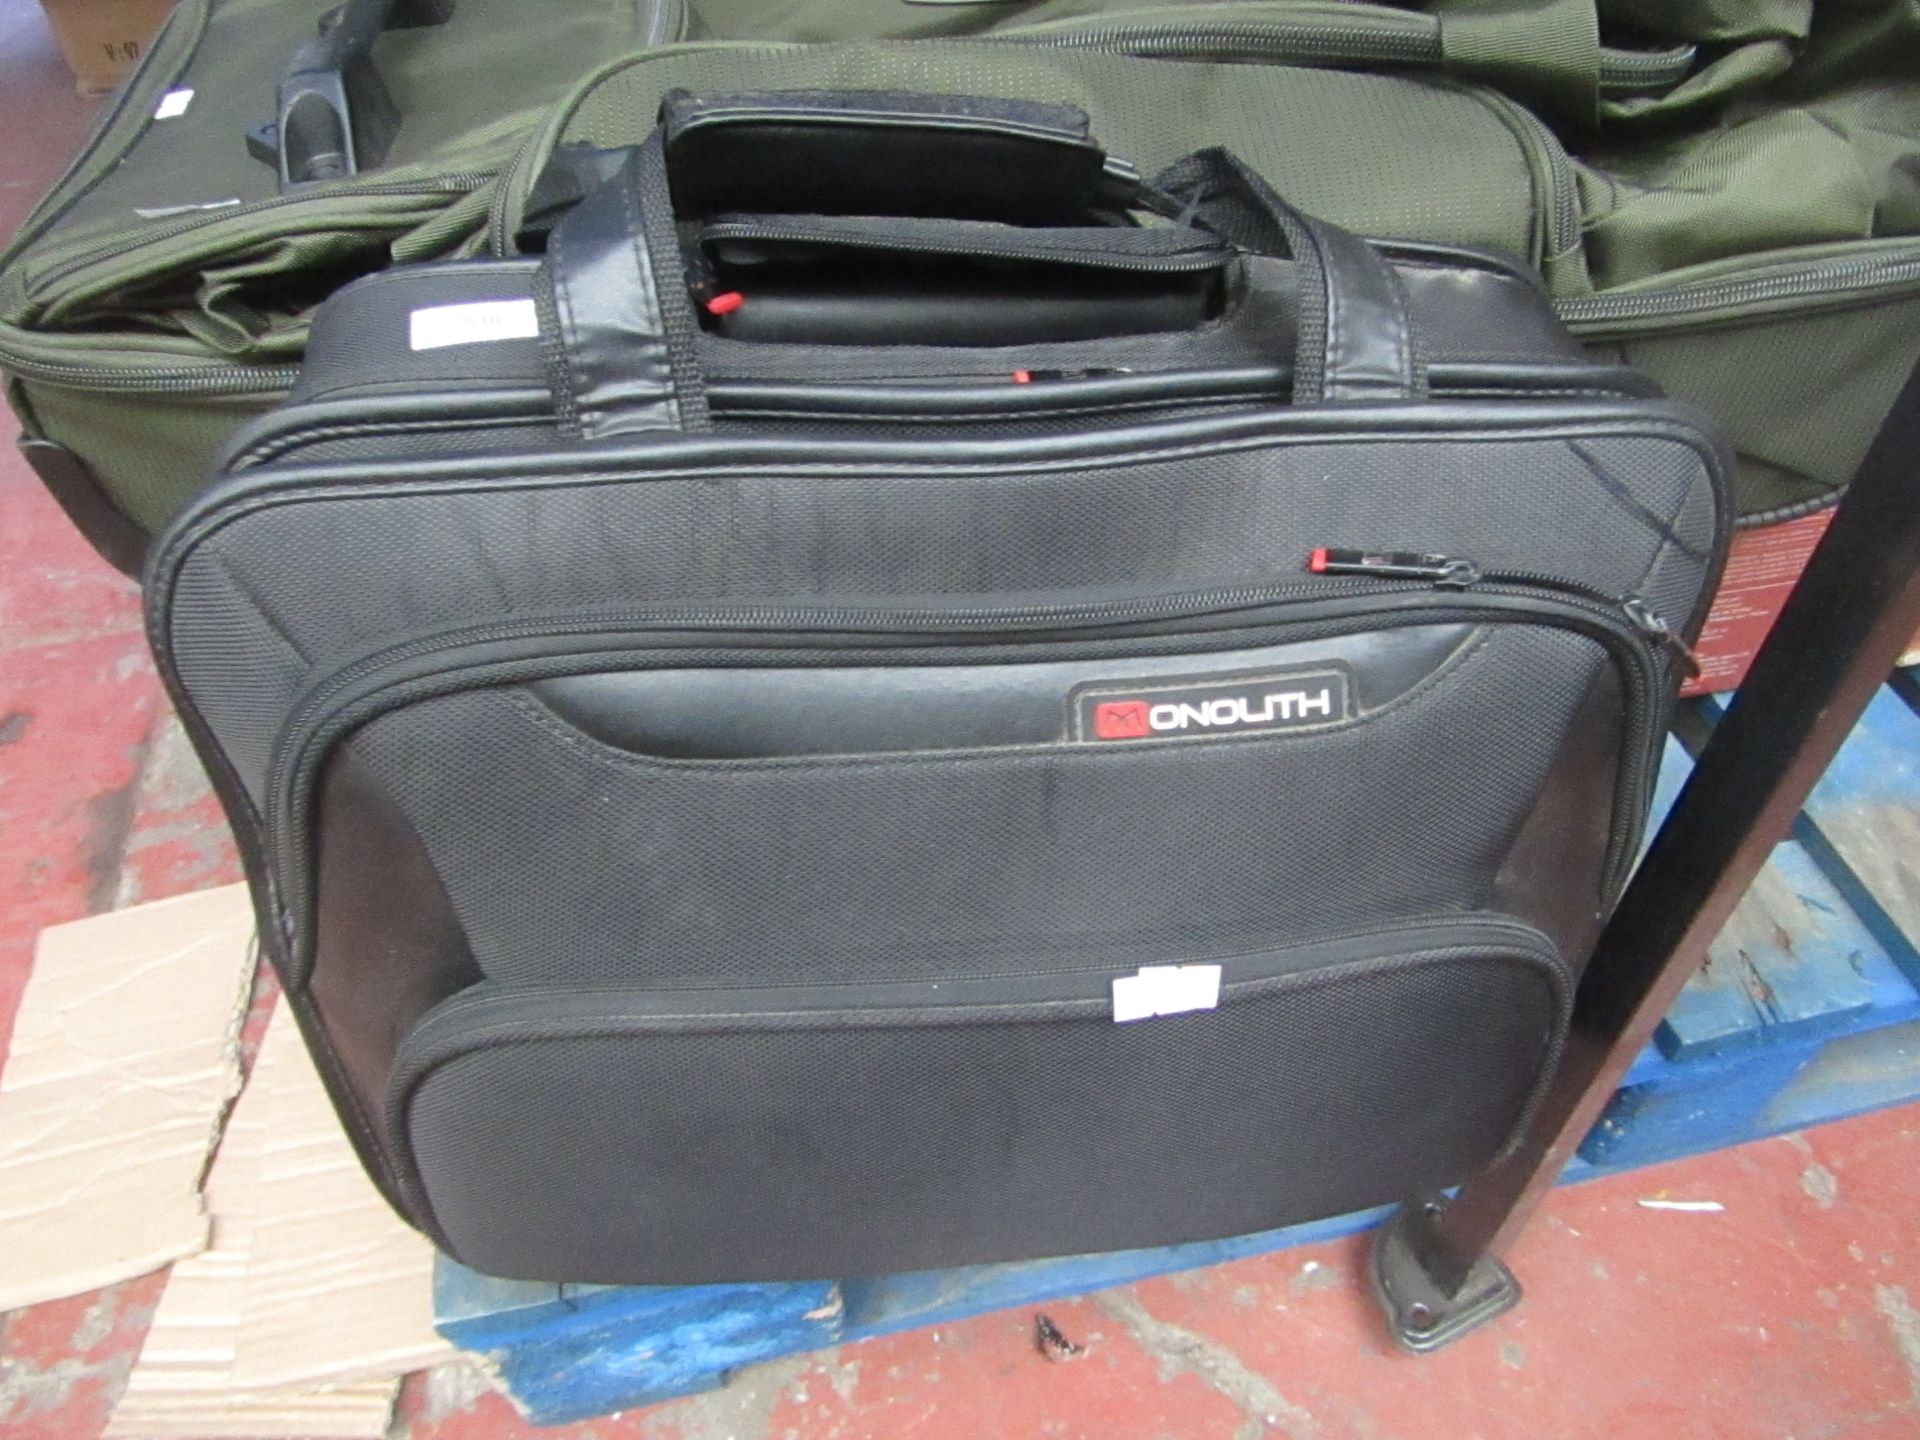 Onolith four compartment carry bag.